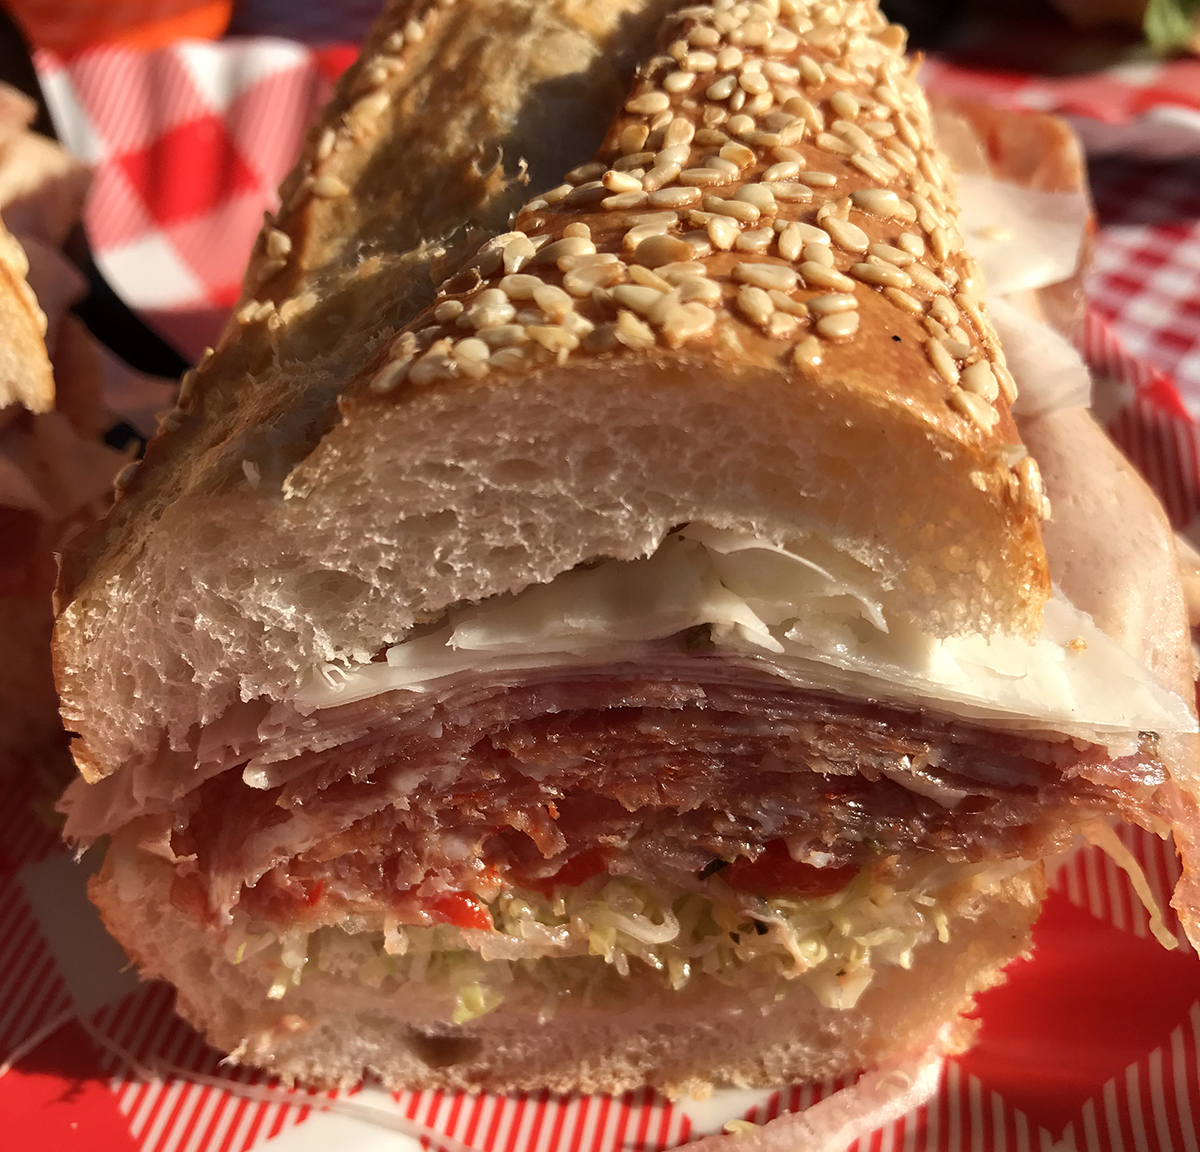 Uncle Paulie's Brings the Authentic Italian Subs